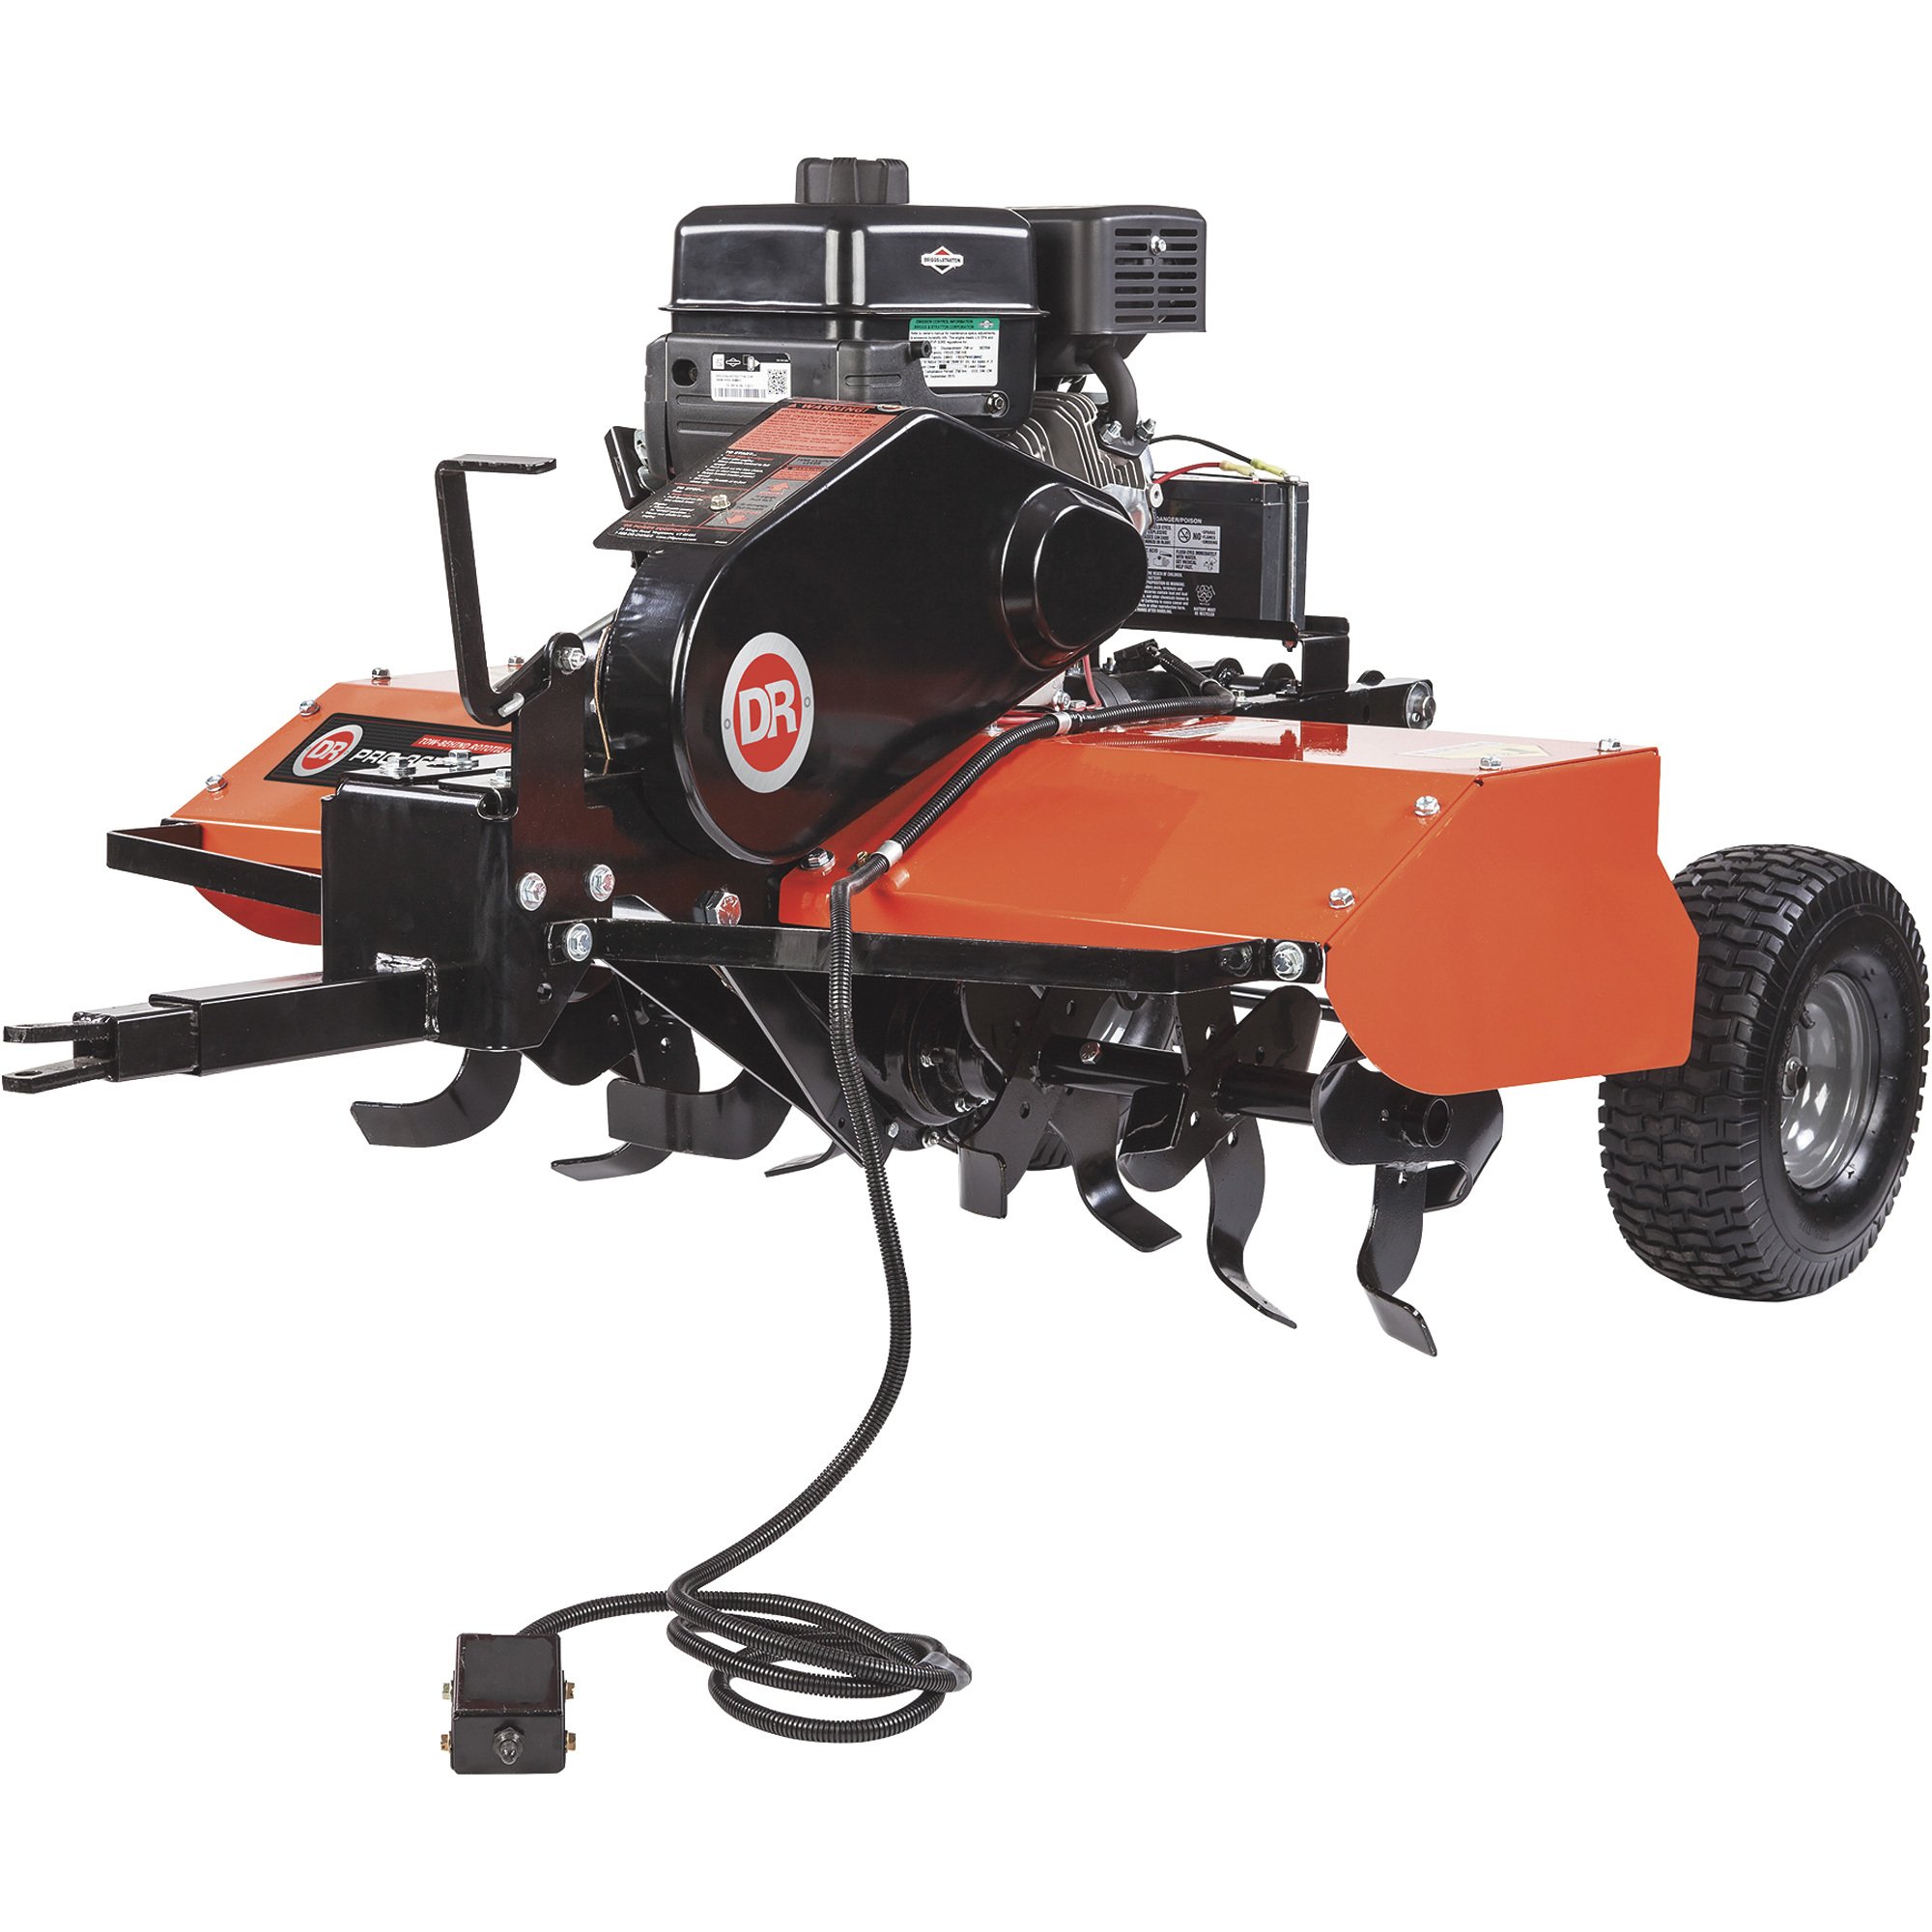 Dr Power Pro Tow Behind Rototiller